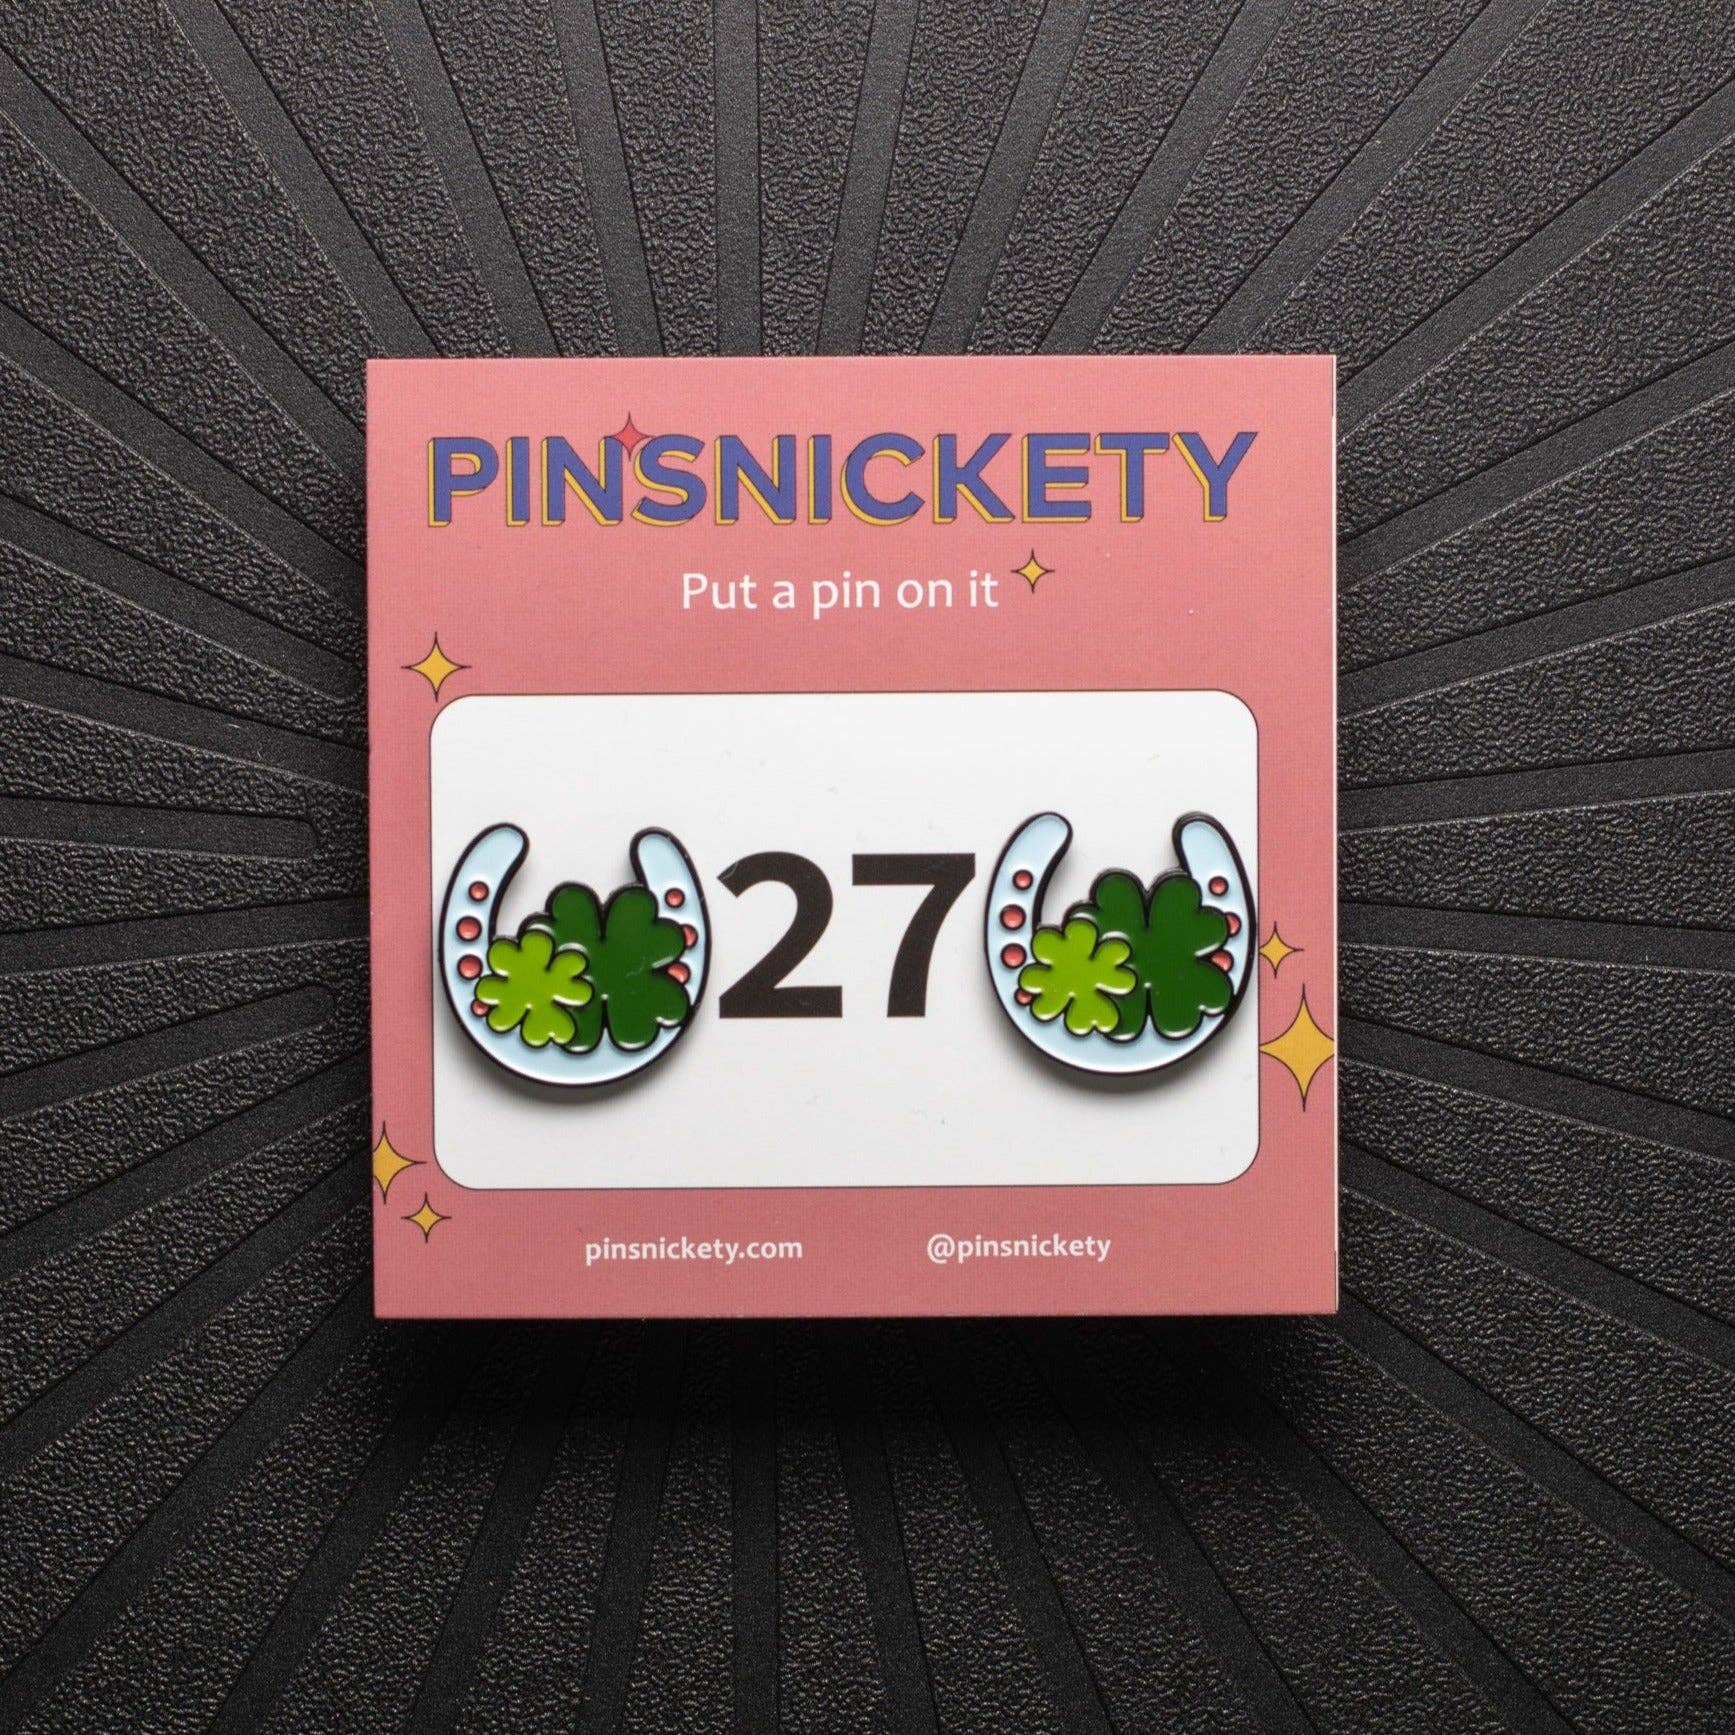 Pinsnickety - Horseshoe Pins